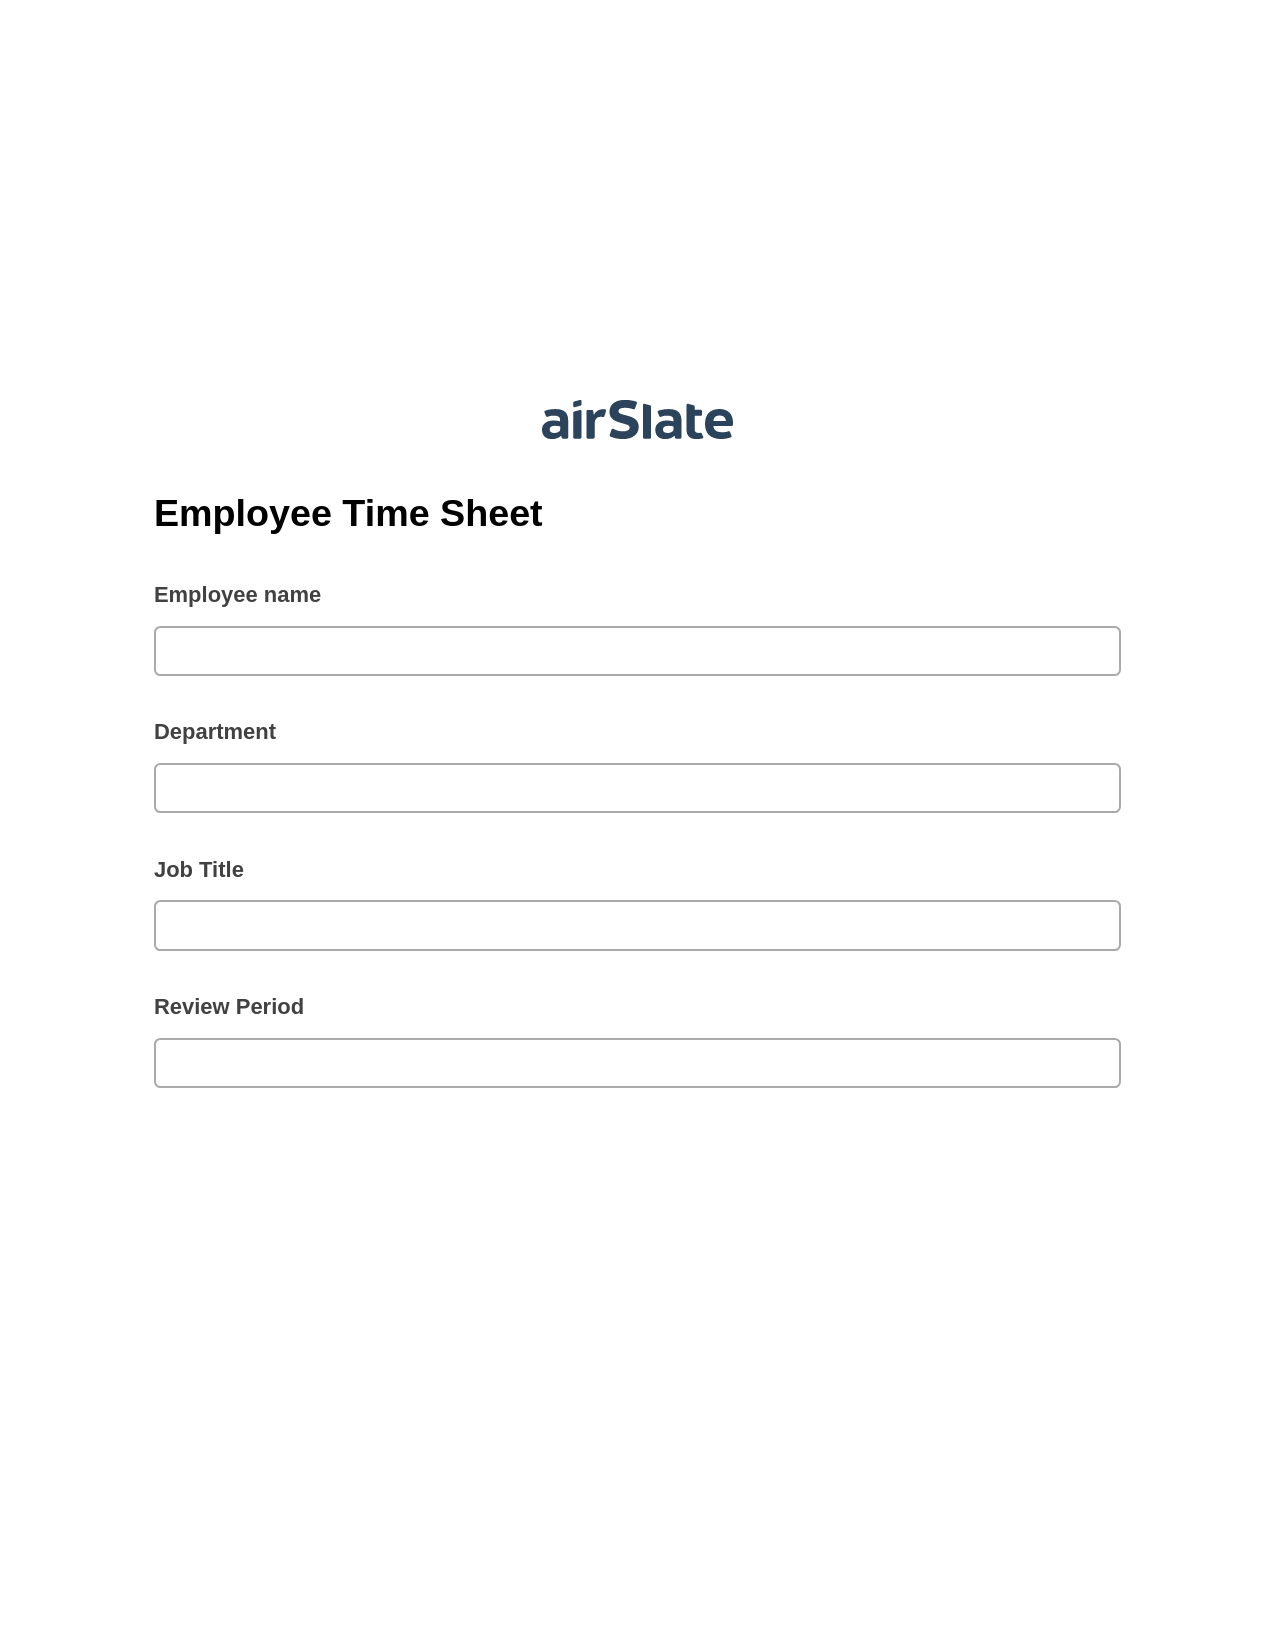 Multirole Employee Time Sheet Pre-fill Dropdowns from Airtable, Create slate addon, Archive to Dropbox Bot